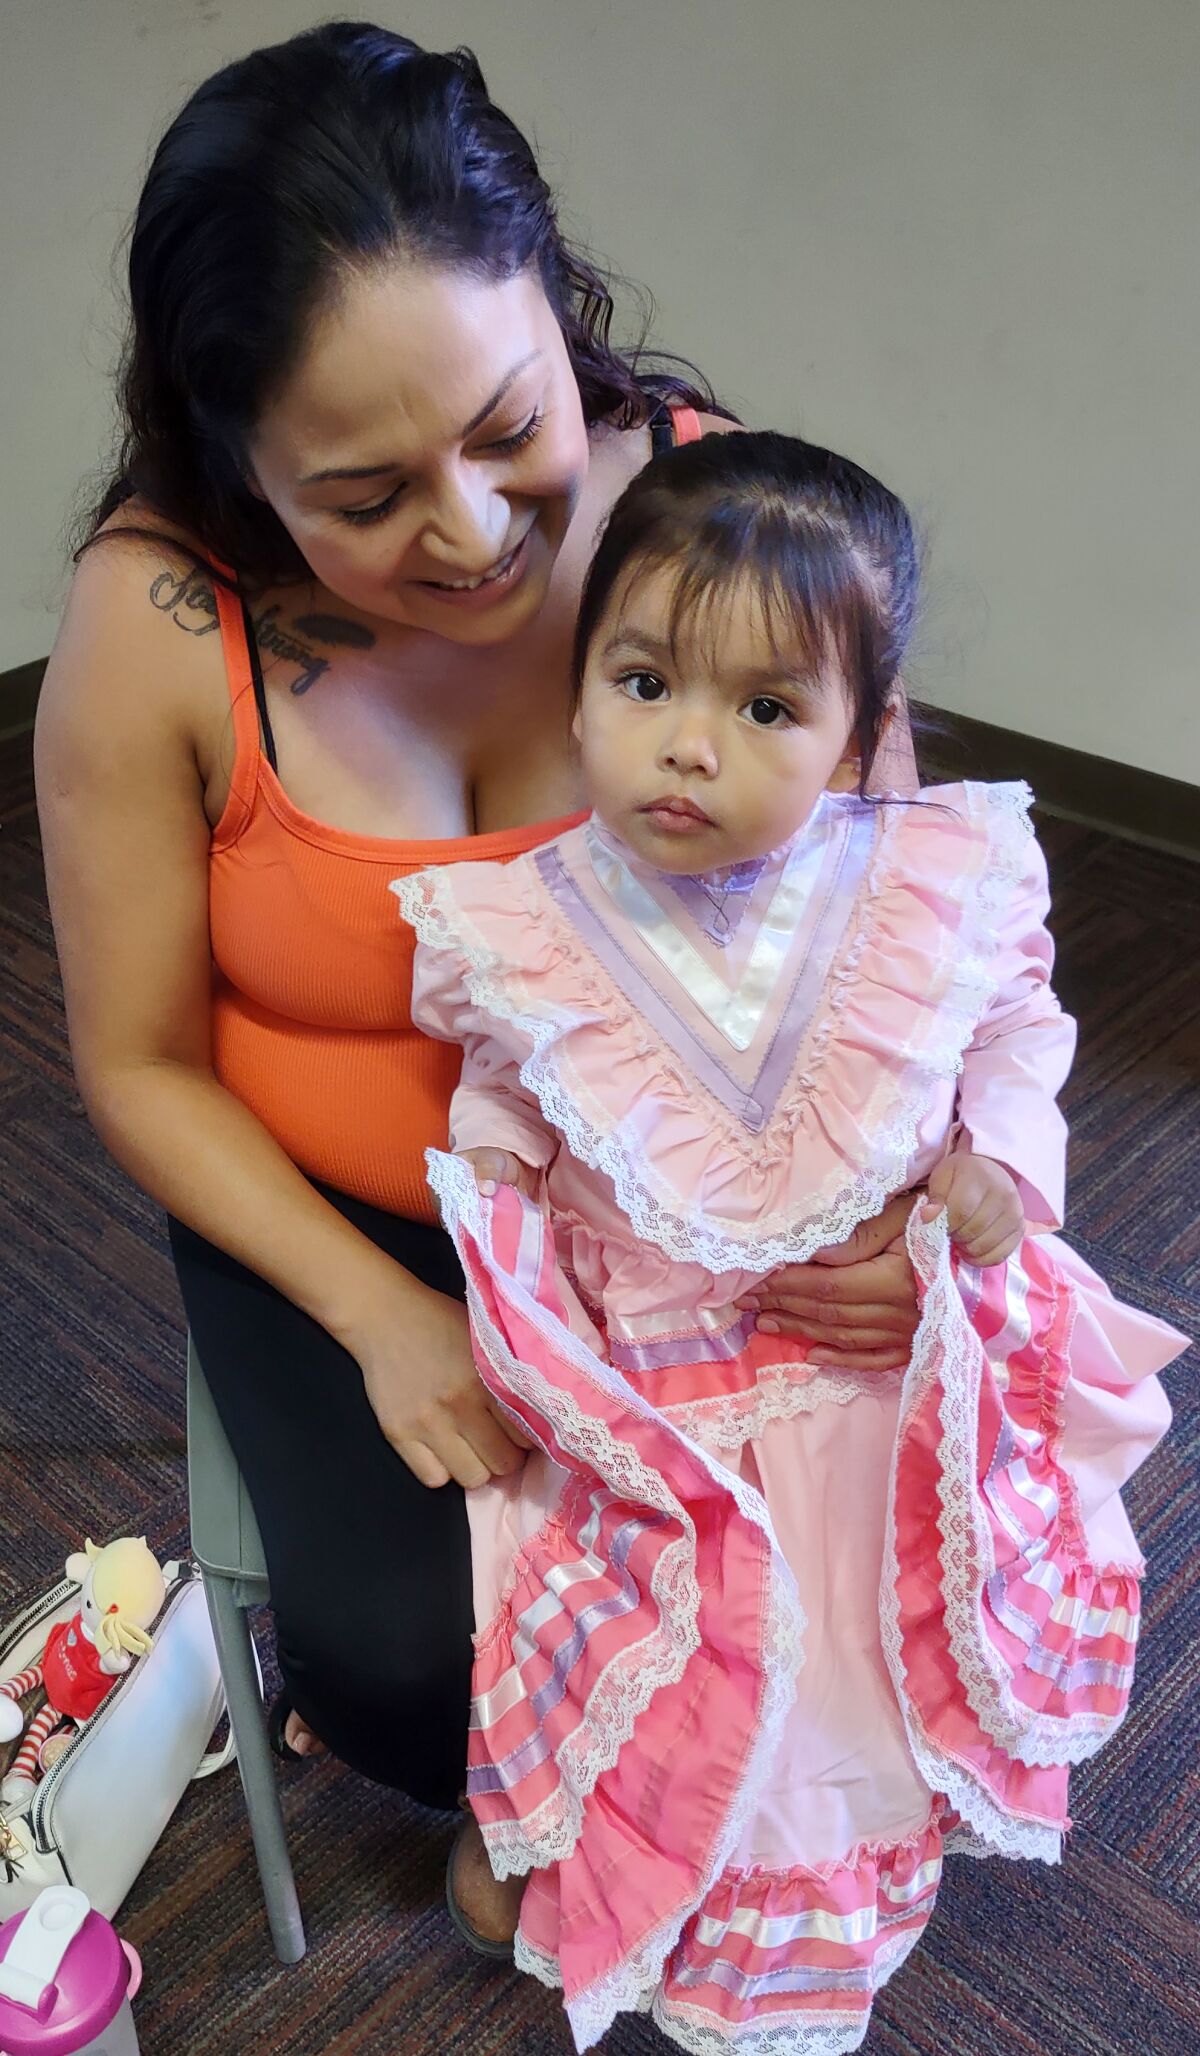 Ramona resident Geniss Duran, 3, likes dressing up as a princess for her Ballet Folklorico lessons.